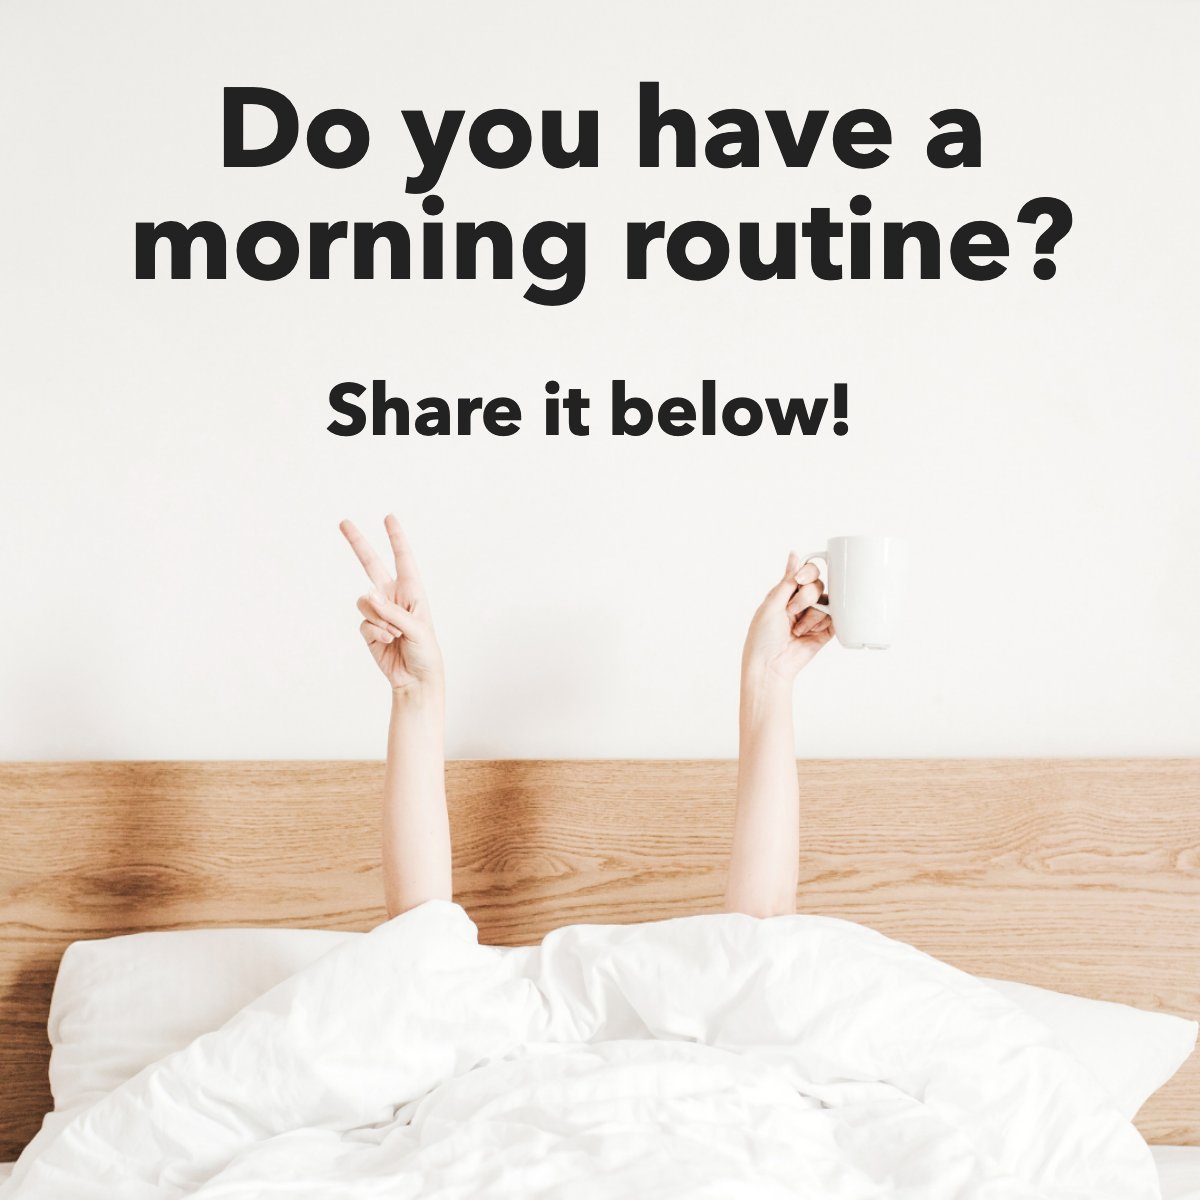 There is a perfect morning routine that will make YOU happy and productive all day, you just have to find yours. 🌞 ☕

#morningroutine #morningroutinegoals #morningroutineideas #dailyroutines